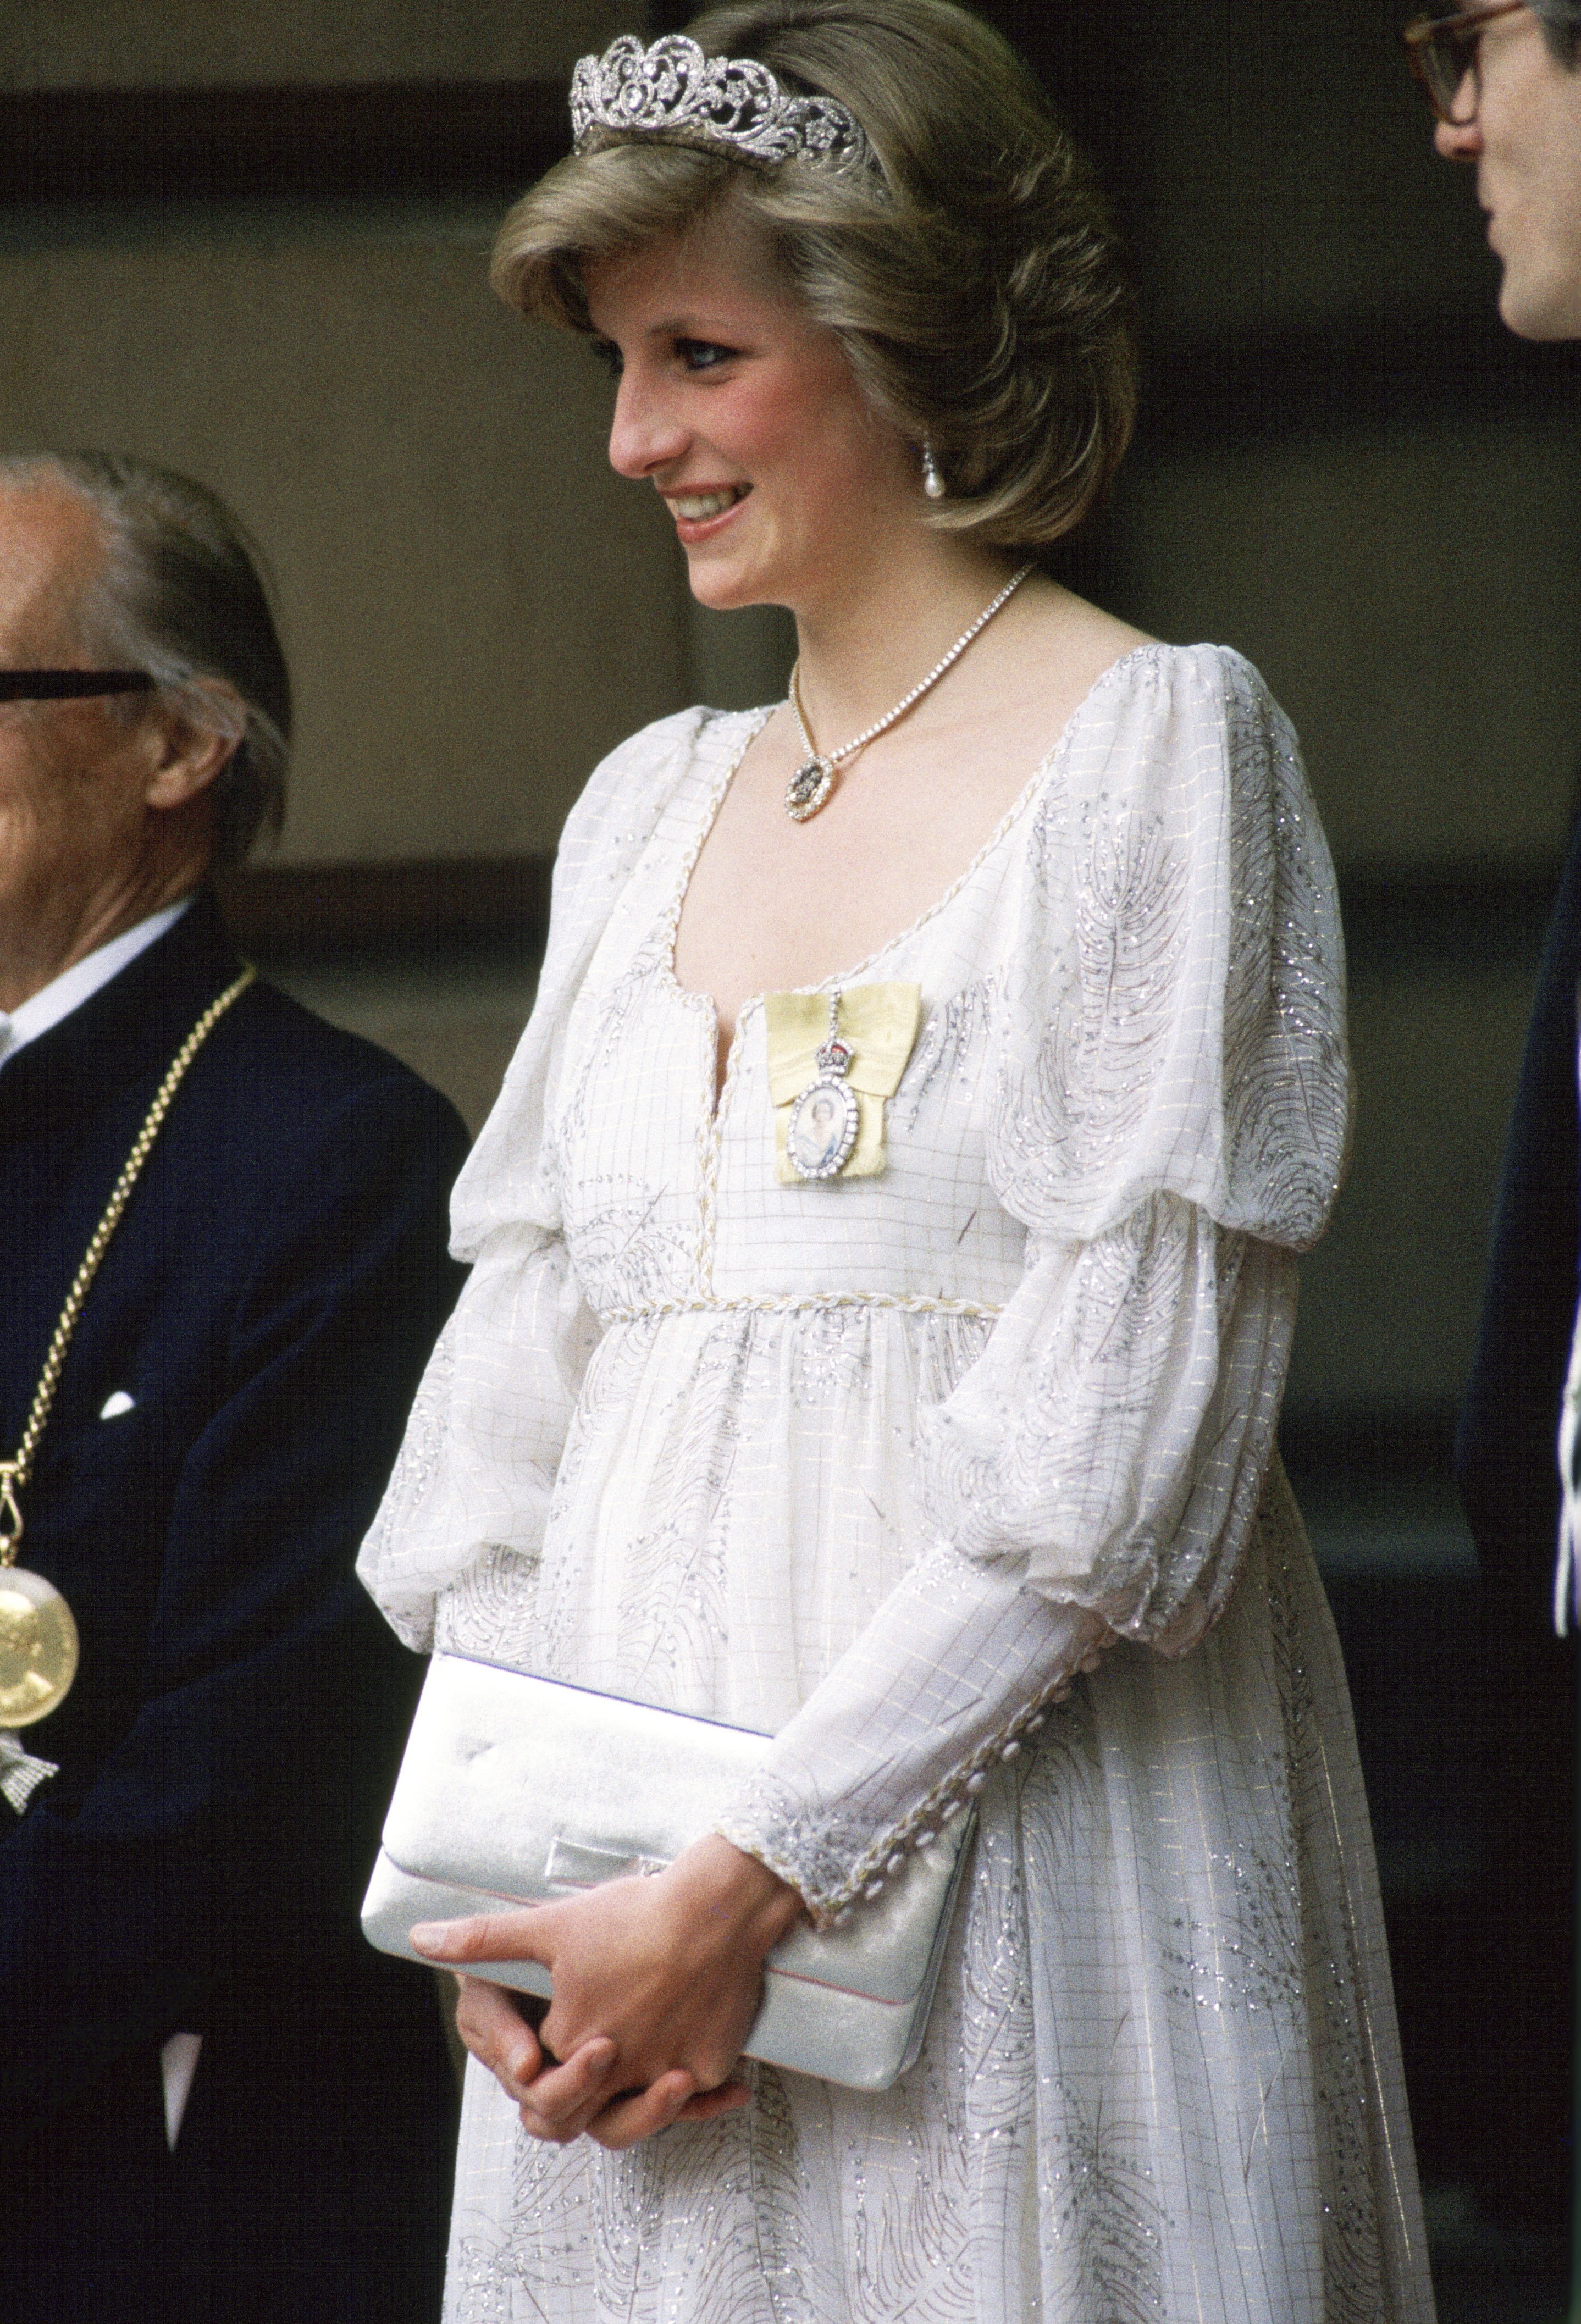 Princess Diana wearing a maternity dress with the Spencer family Tiara, Royal Family Orders and a diamond necklace In the shape of the Prince Of Wales feathers an event at the Royal Academy on May 14, 1984 | Source: Getty Images 